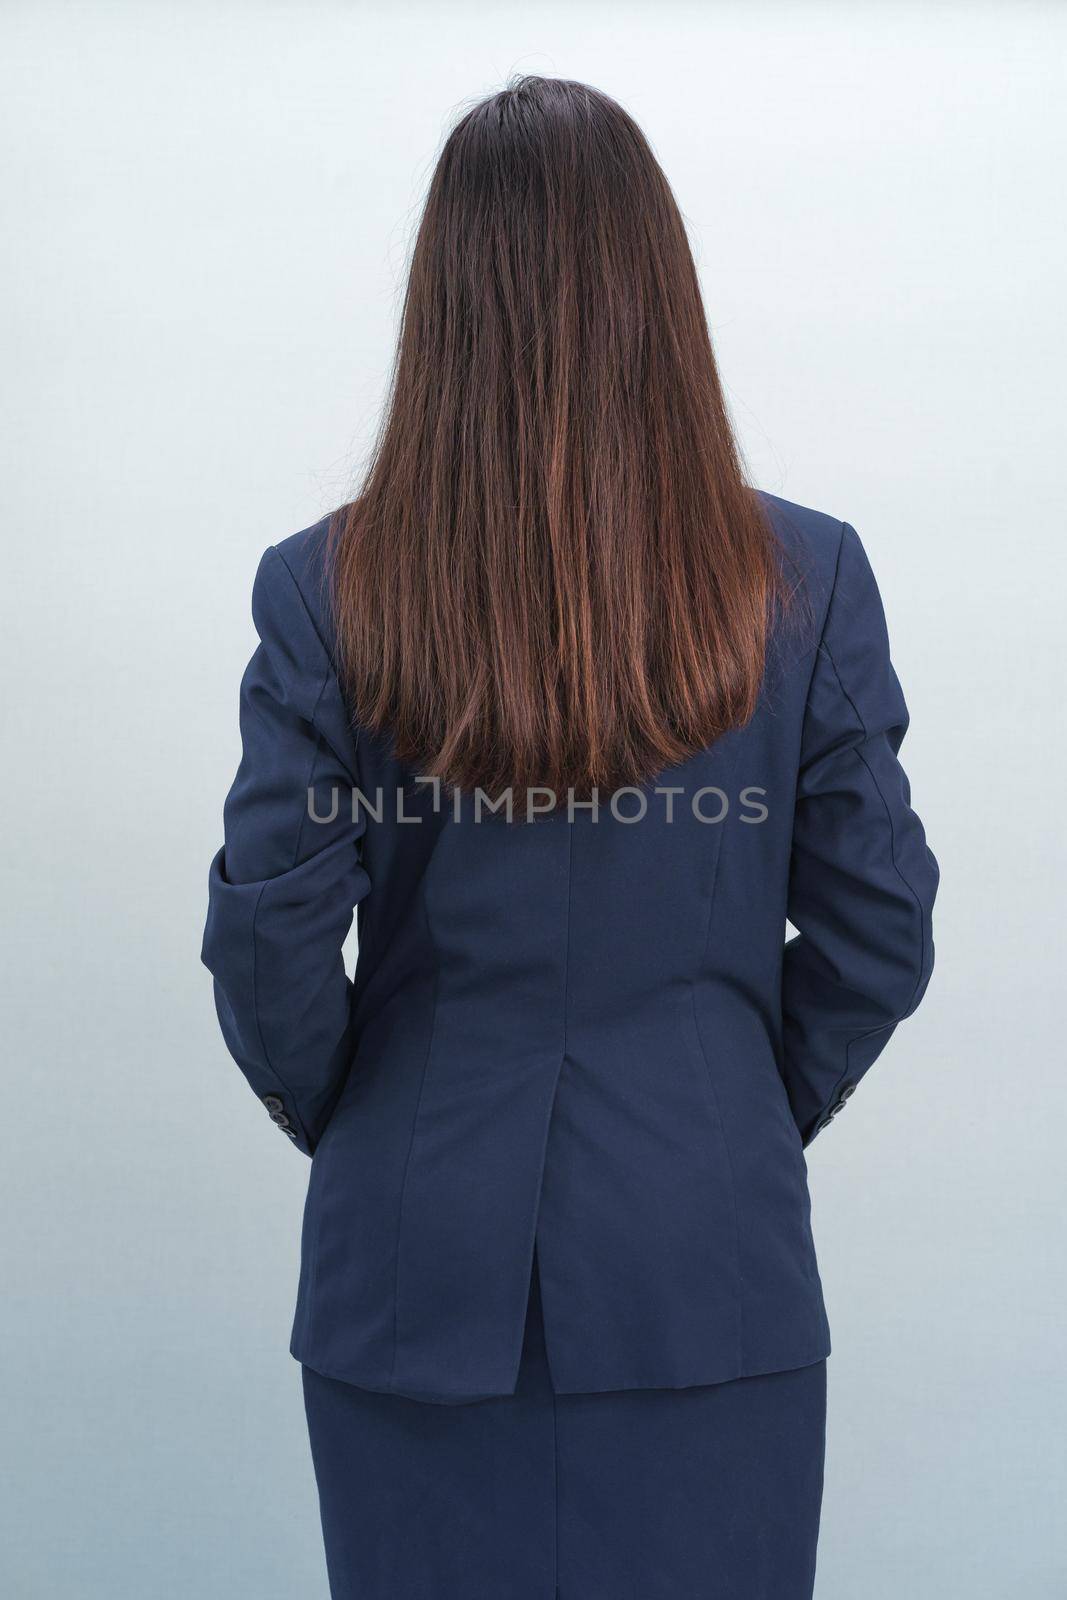 Asian women wearing a suit in studio from behind